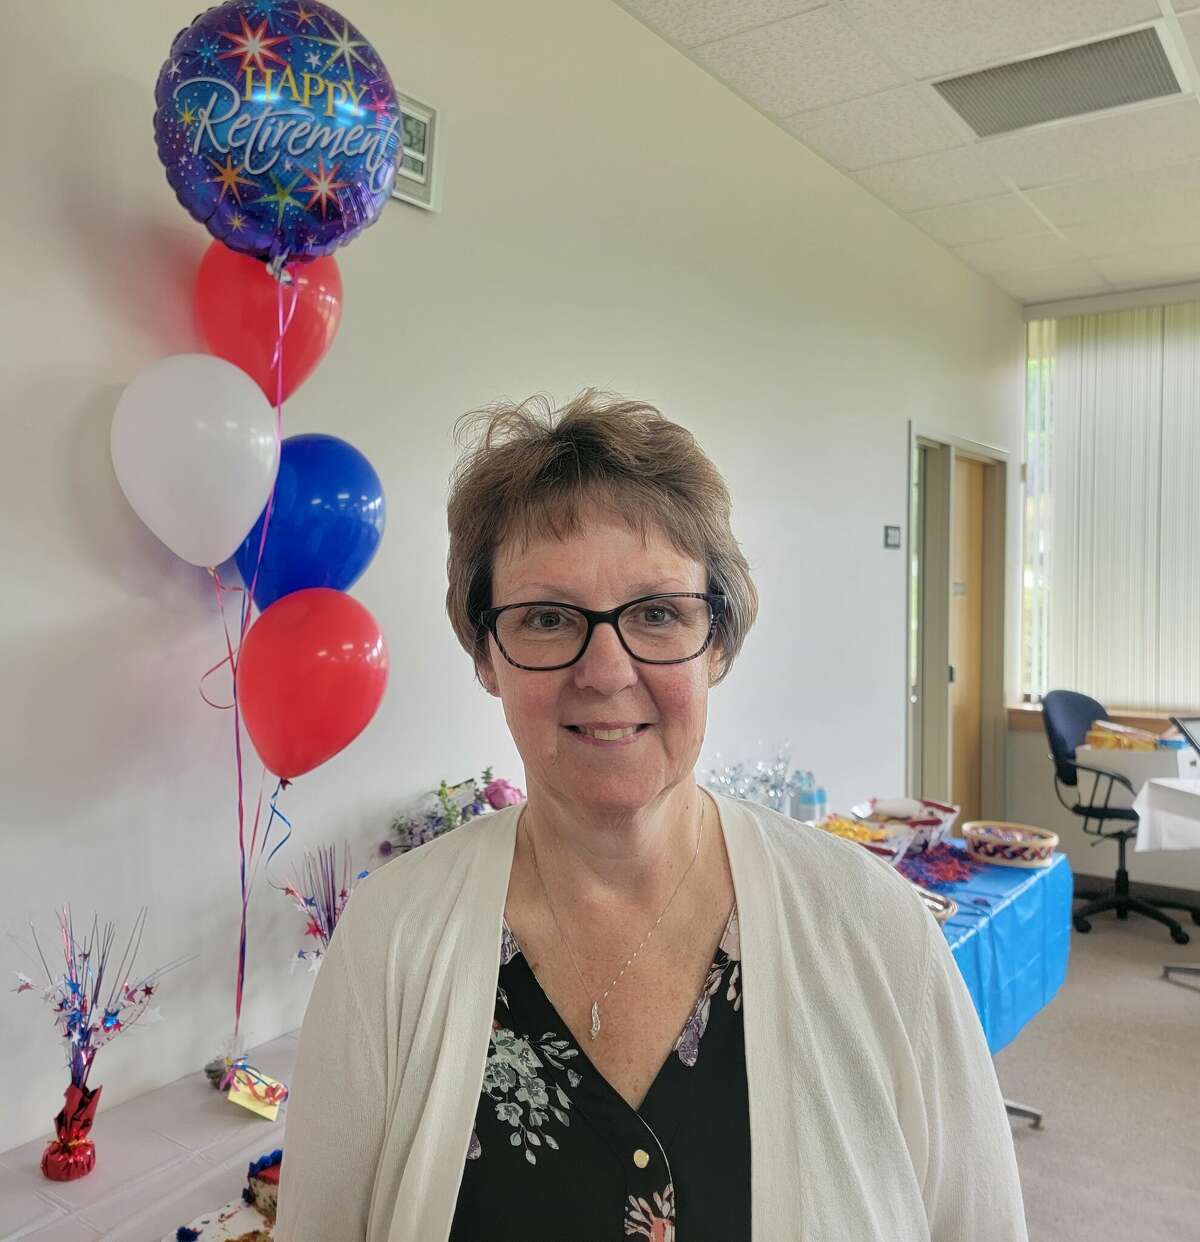 Dawn Olney, has worked for Benzie County for 35 years, 21 of those years as elected county clerk. She retired officially on June 1. 